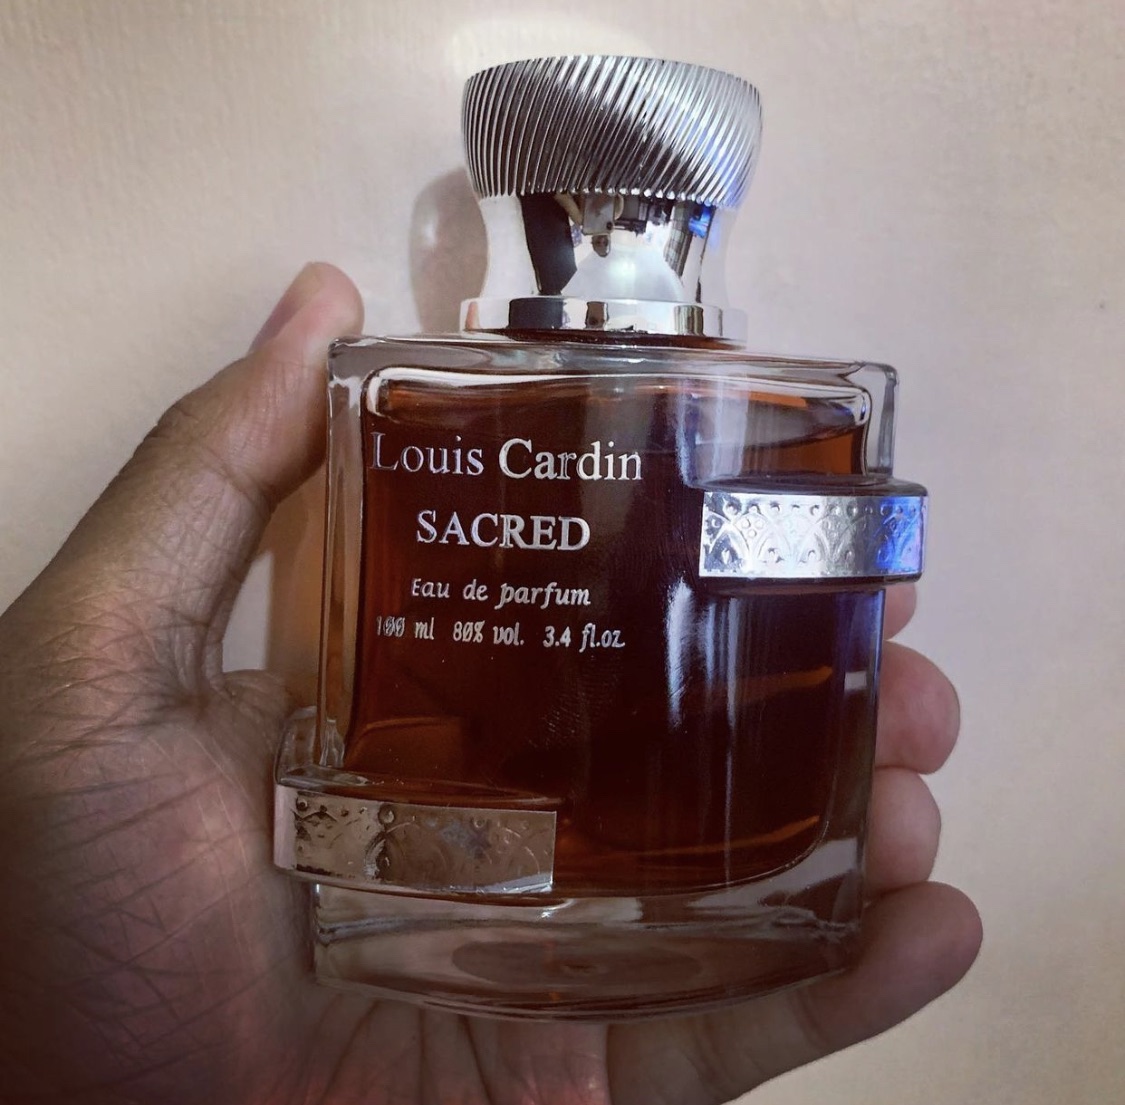 Sacred Louis Cardin perfume - a fragrance for women and men 2011